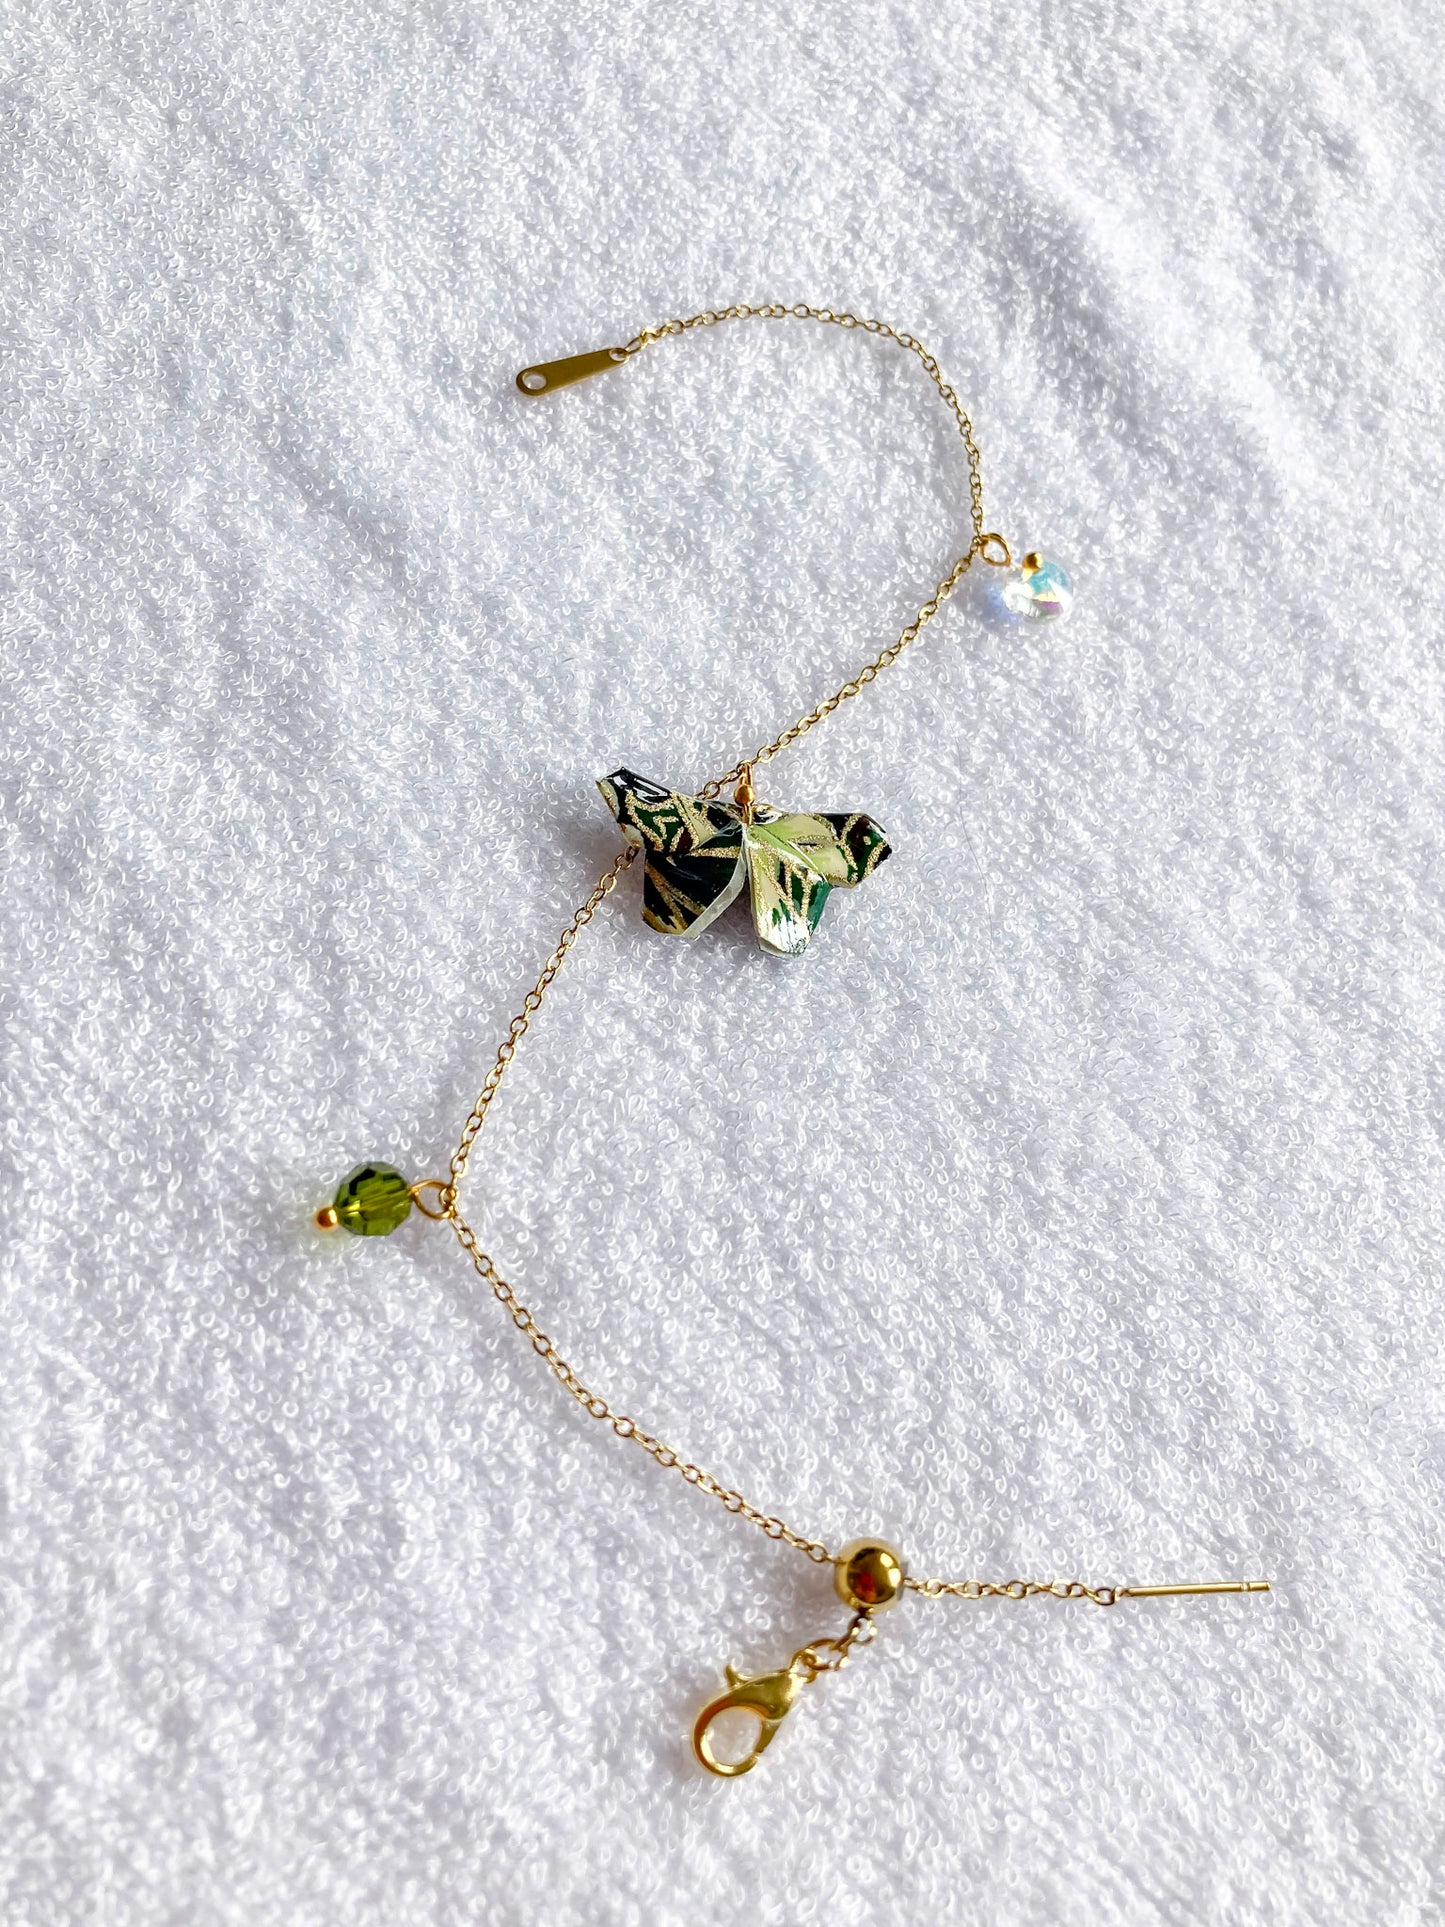 Origami Bracelet - Green Paper Butterfly, Gold Chain, Swarovski Crystals